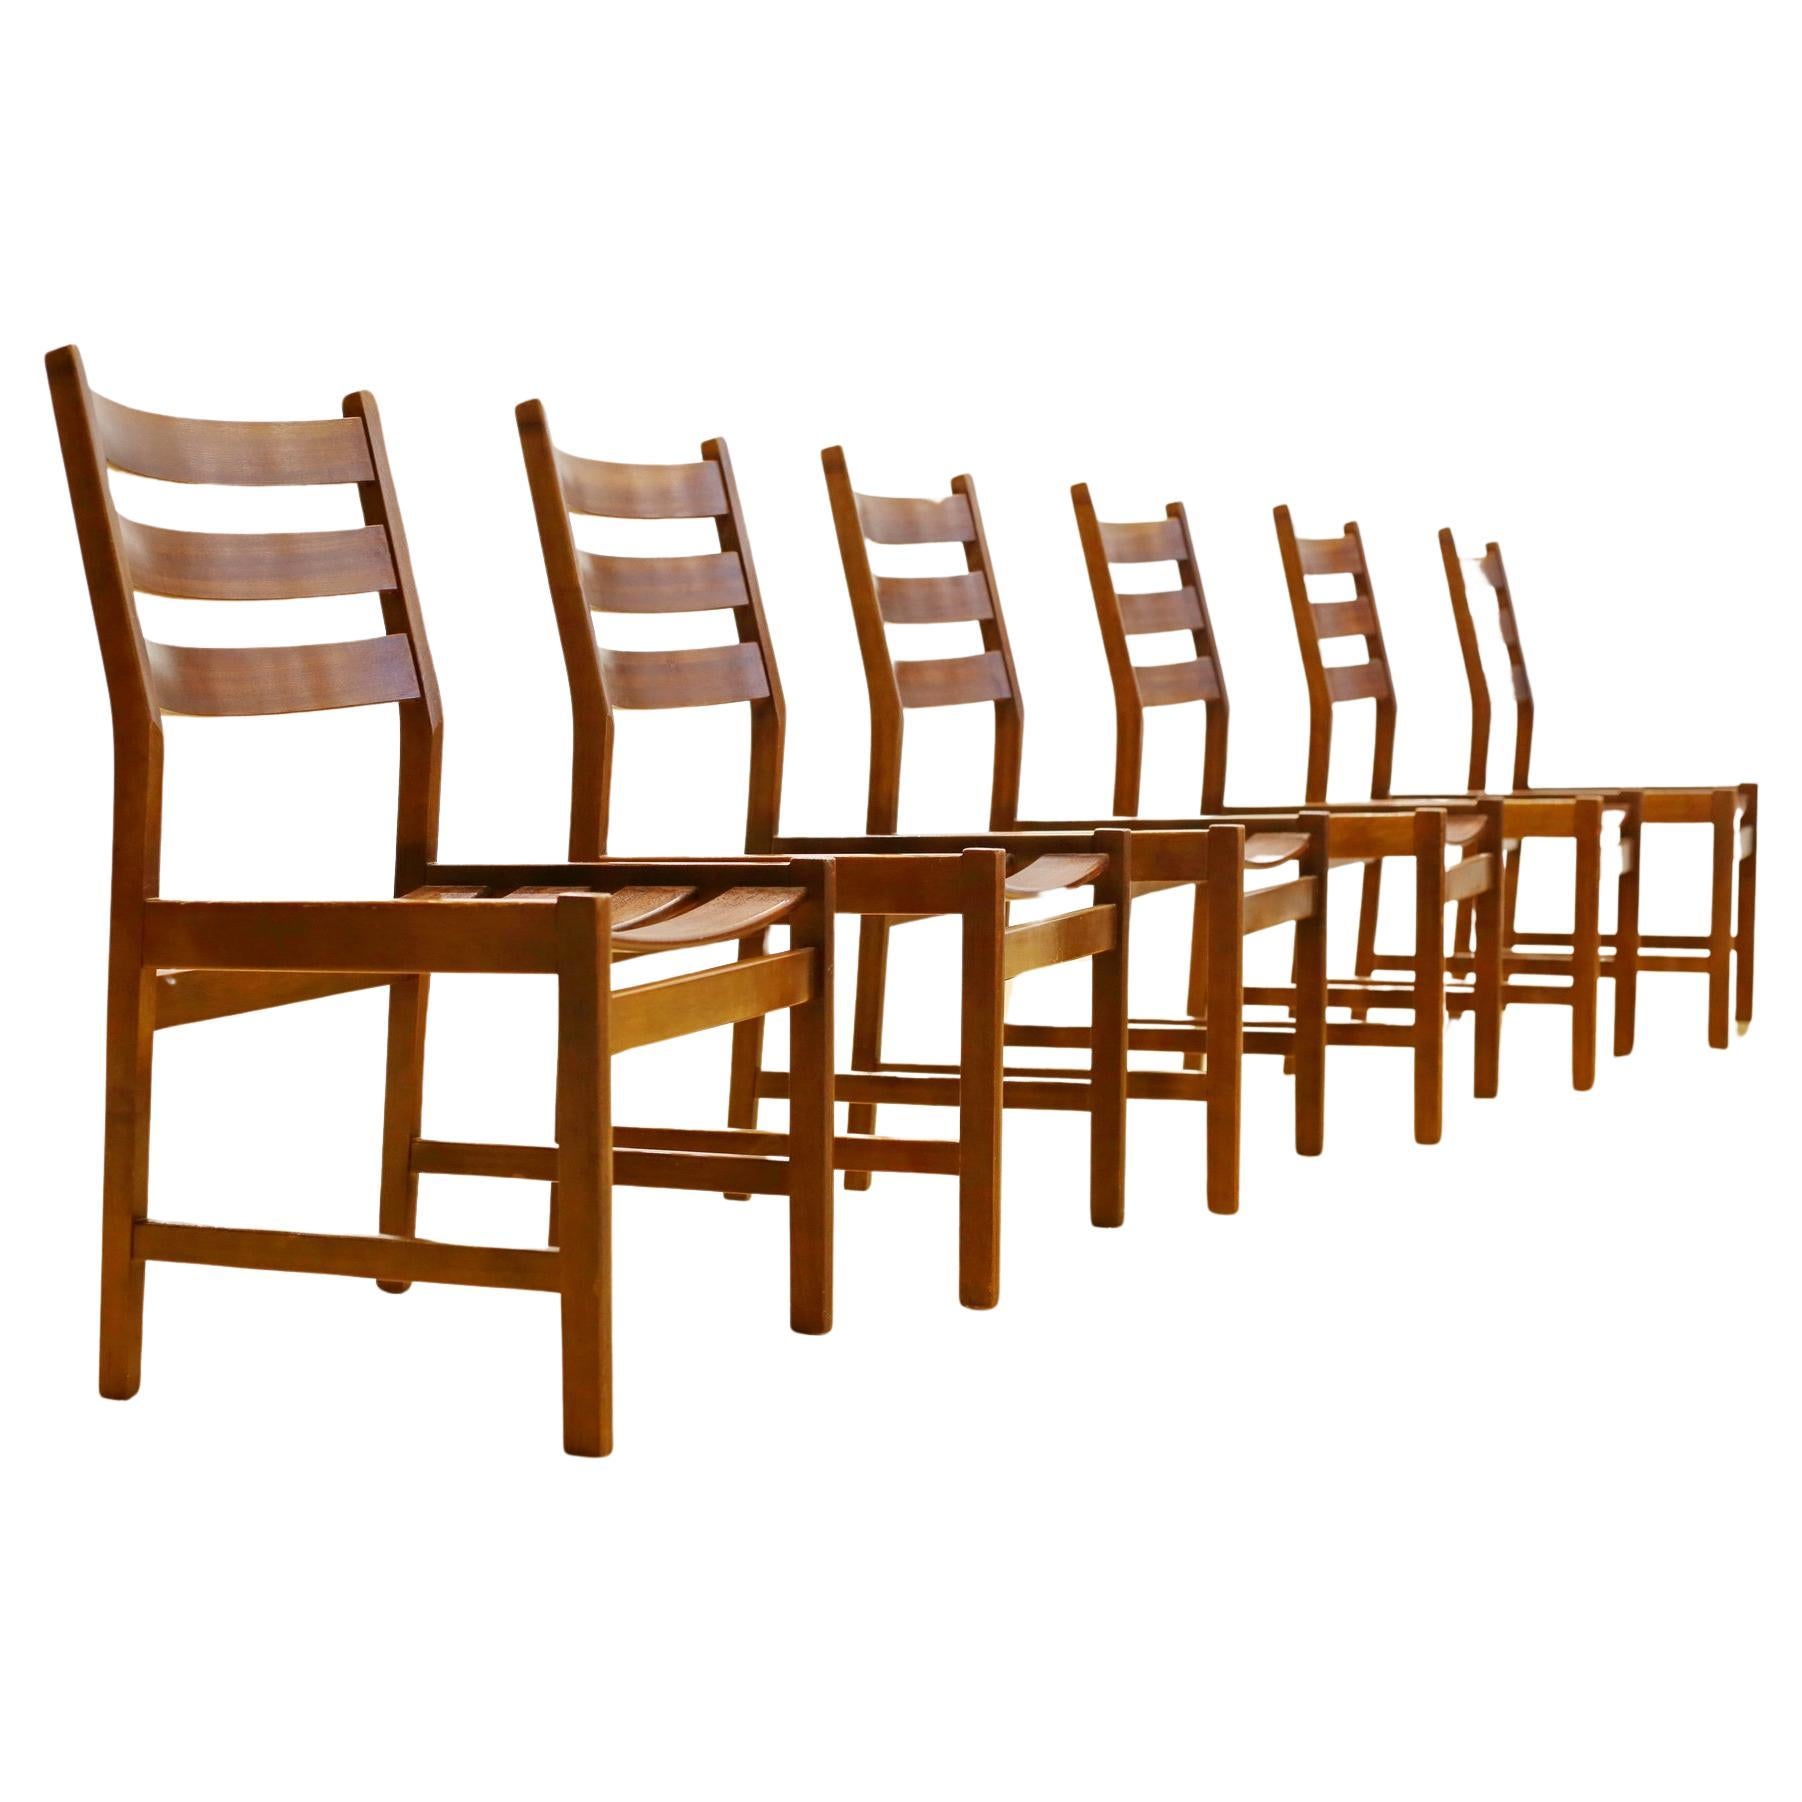 'OTTO LARSEN' Dining Chair Set 6. For Sale